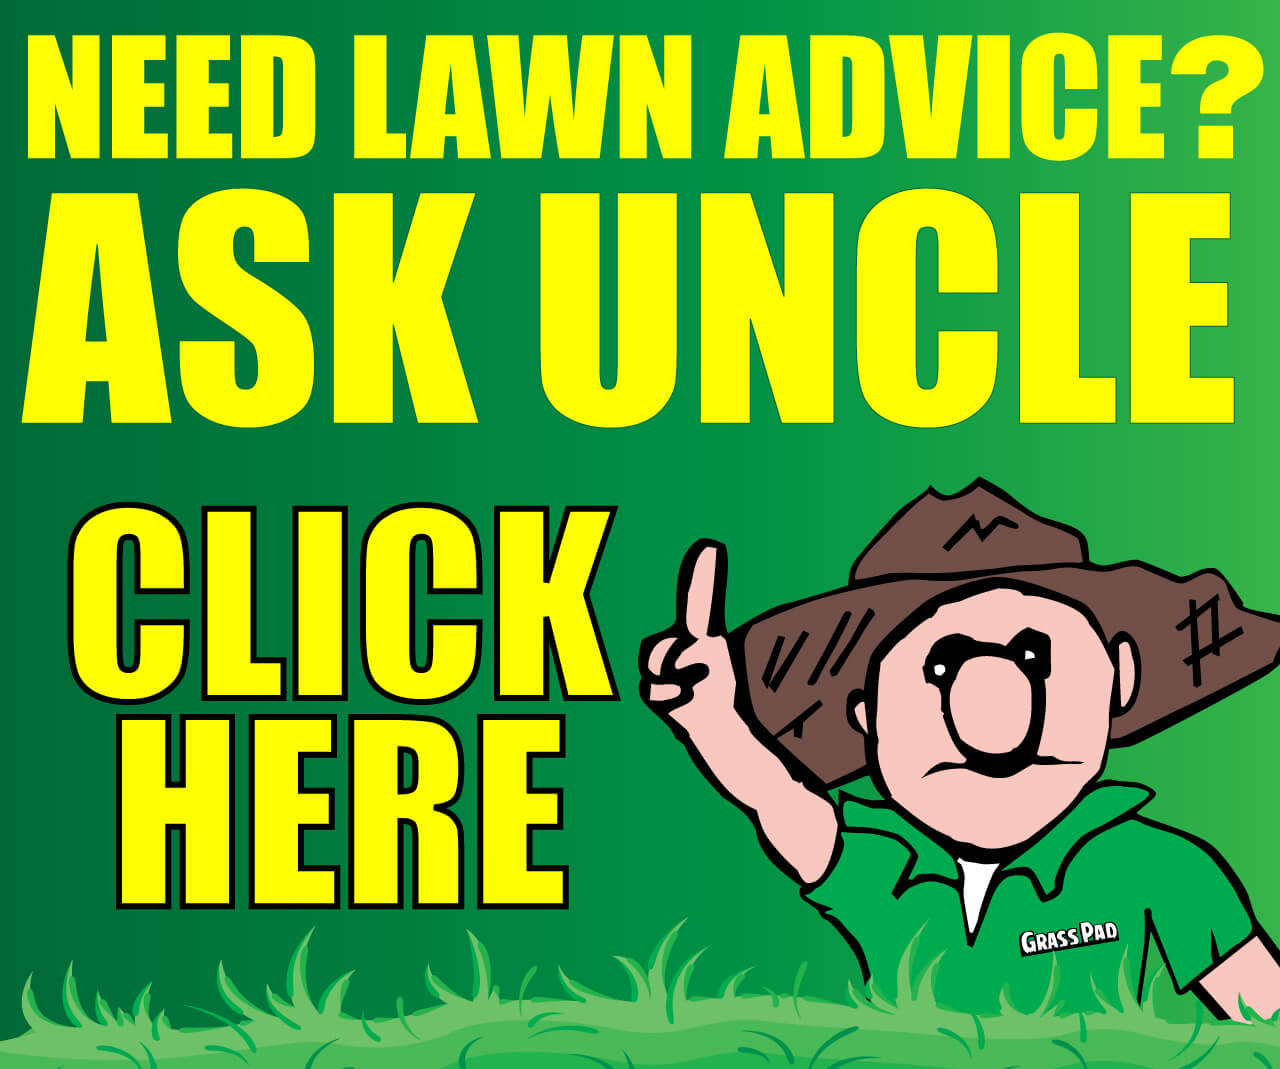 CLICK HERE TO ASK UNCLE